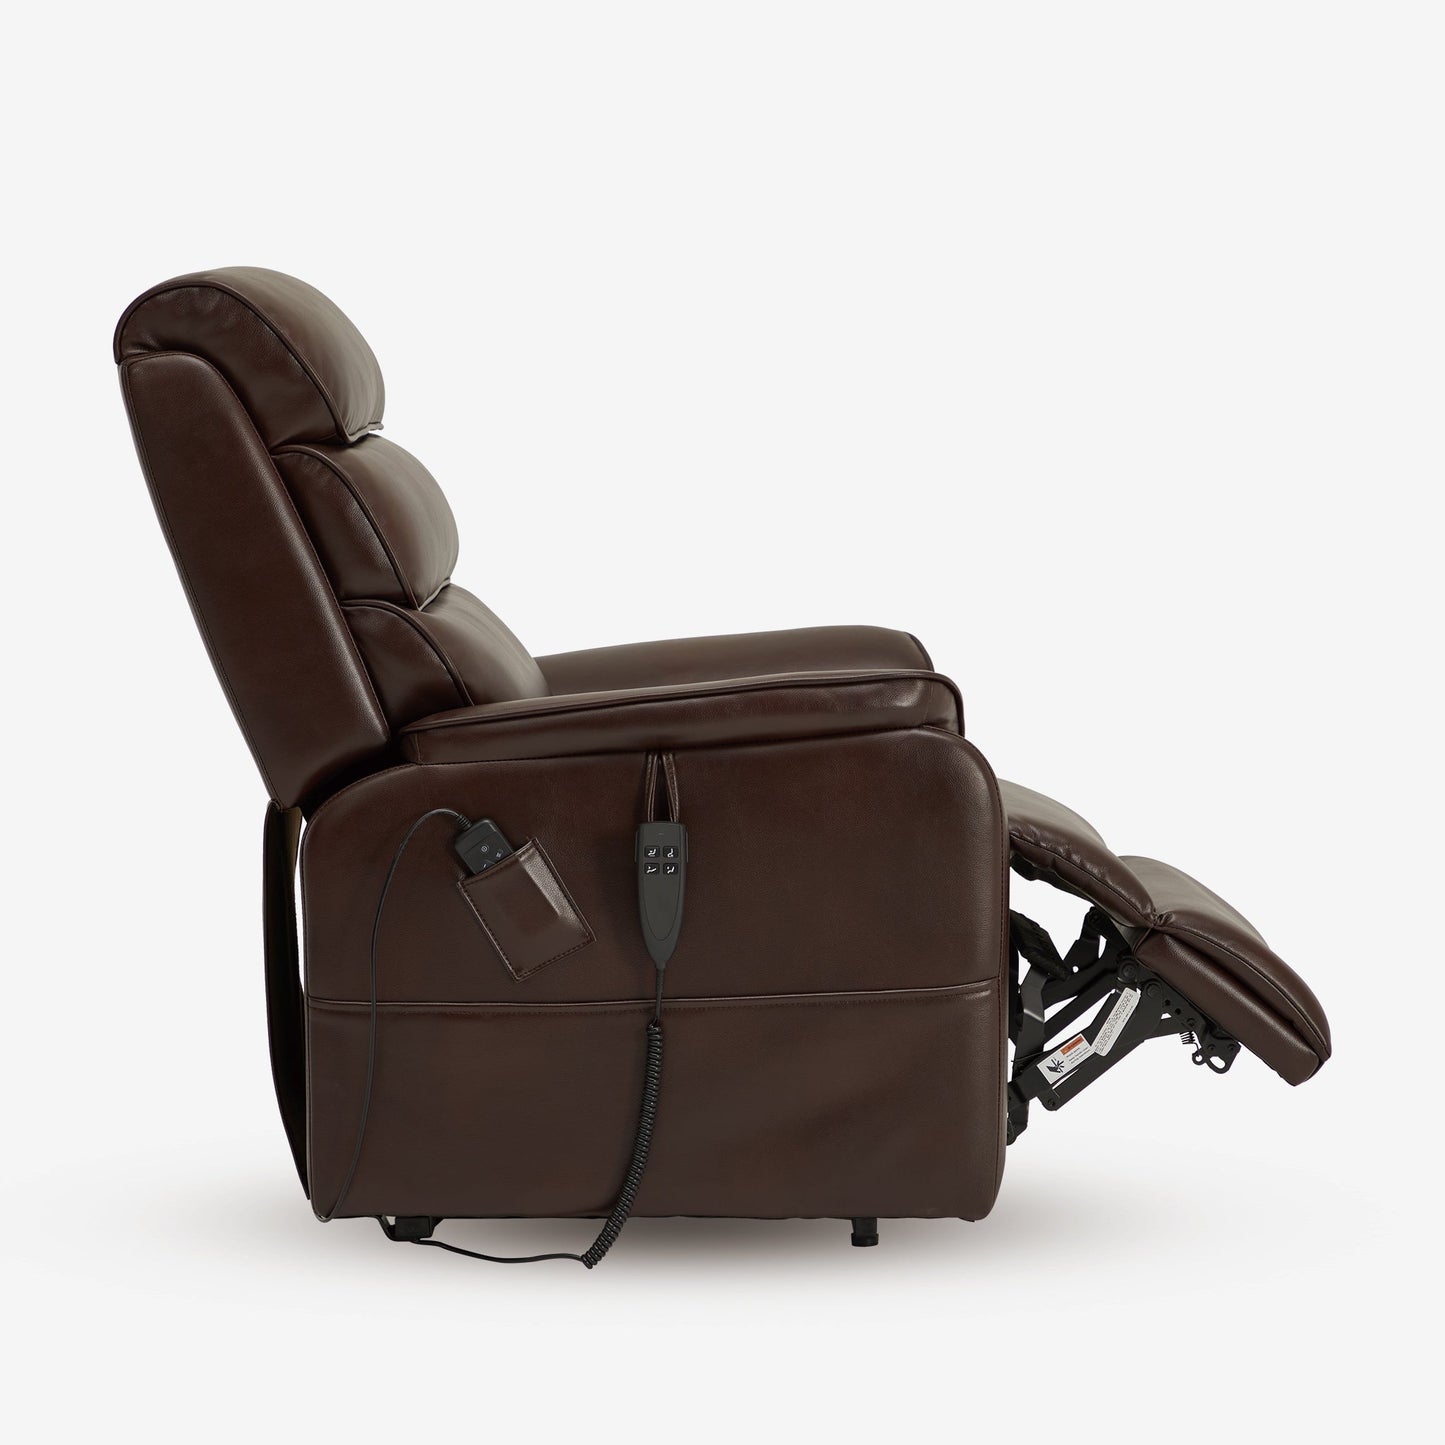 Lay Flat Recliner Lift Chair With Heat Massage And Infinite Positons